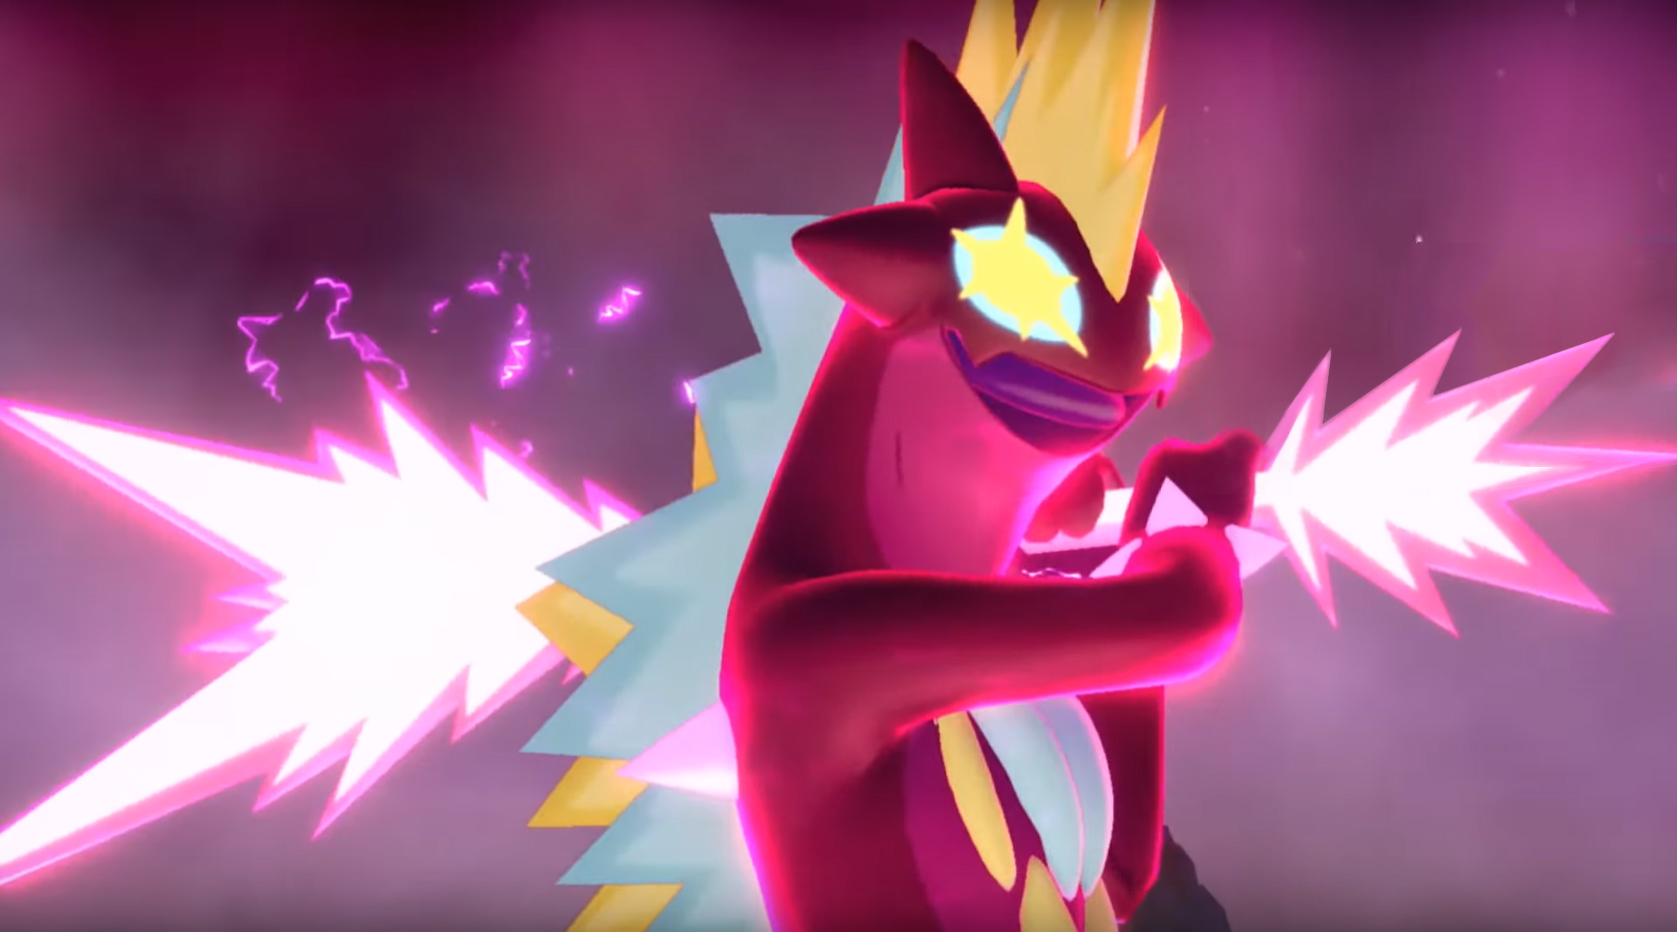 Pokemon Sword and Shield Toxtricity